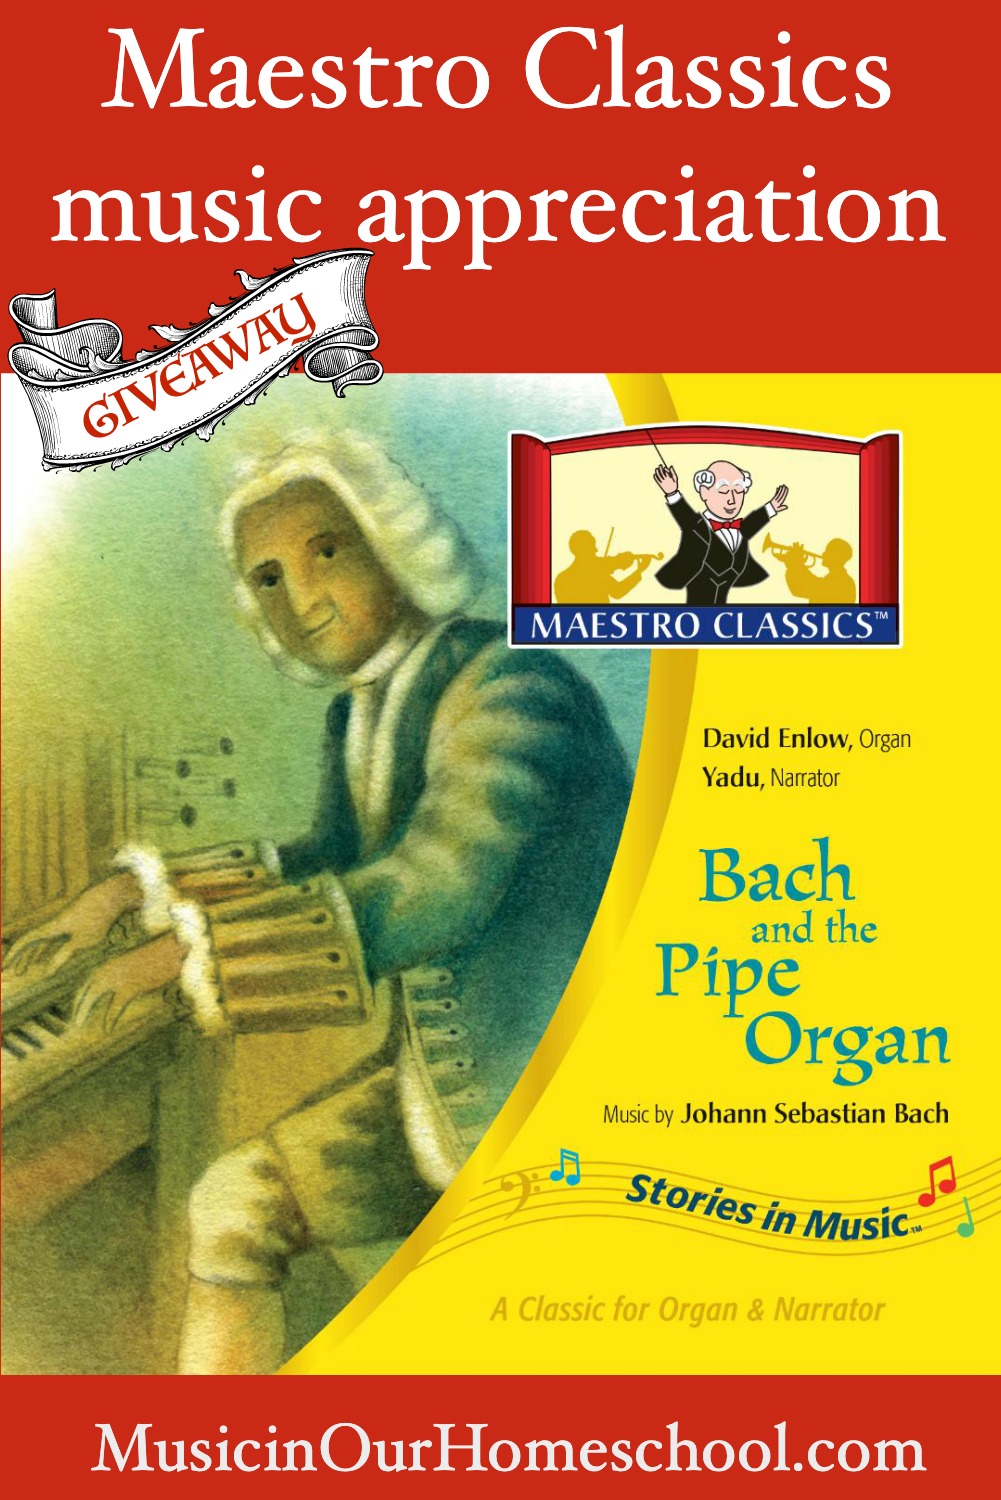 Maestro Classics new Bach CD called "Bach and the Pipe Organ" is a great way to introduce your students to Baroque music. #musicinourhomeschool #homeschoolmusic #musiclessonsforkids